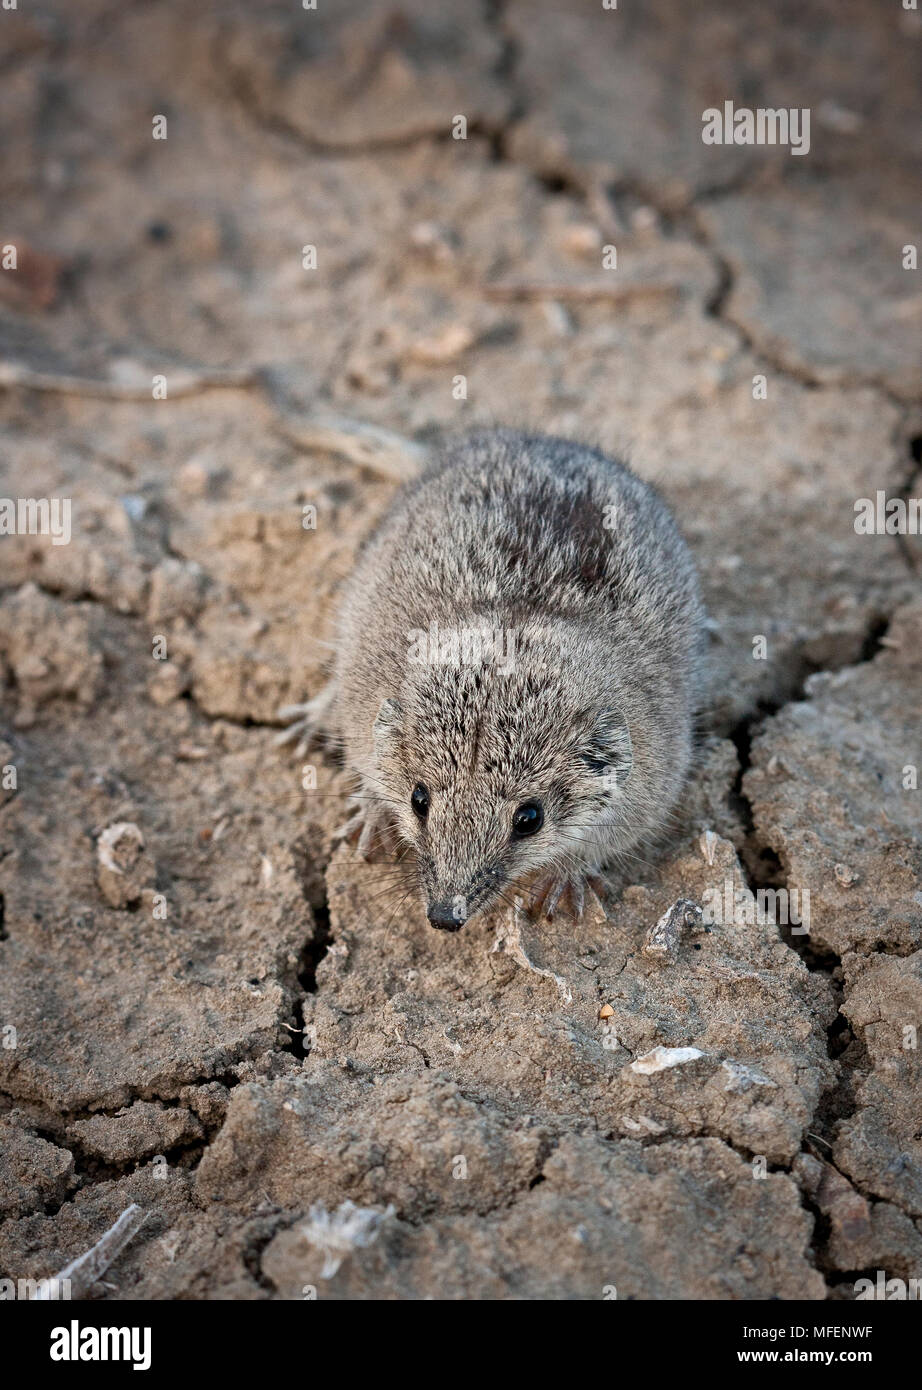 Gile's Planigale (Planigale gilesi), Fam. Dasyuridae, One of the smallest marsupials, These insectivorous marsupials shelter and forage in soil cracks Stock Photo